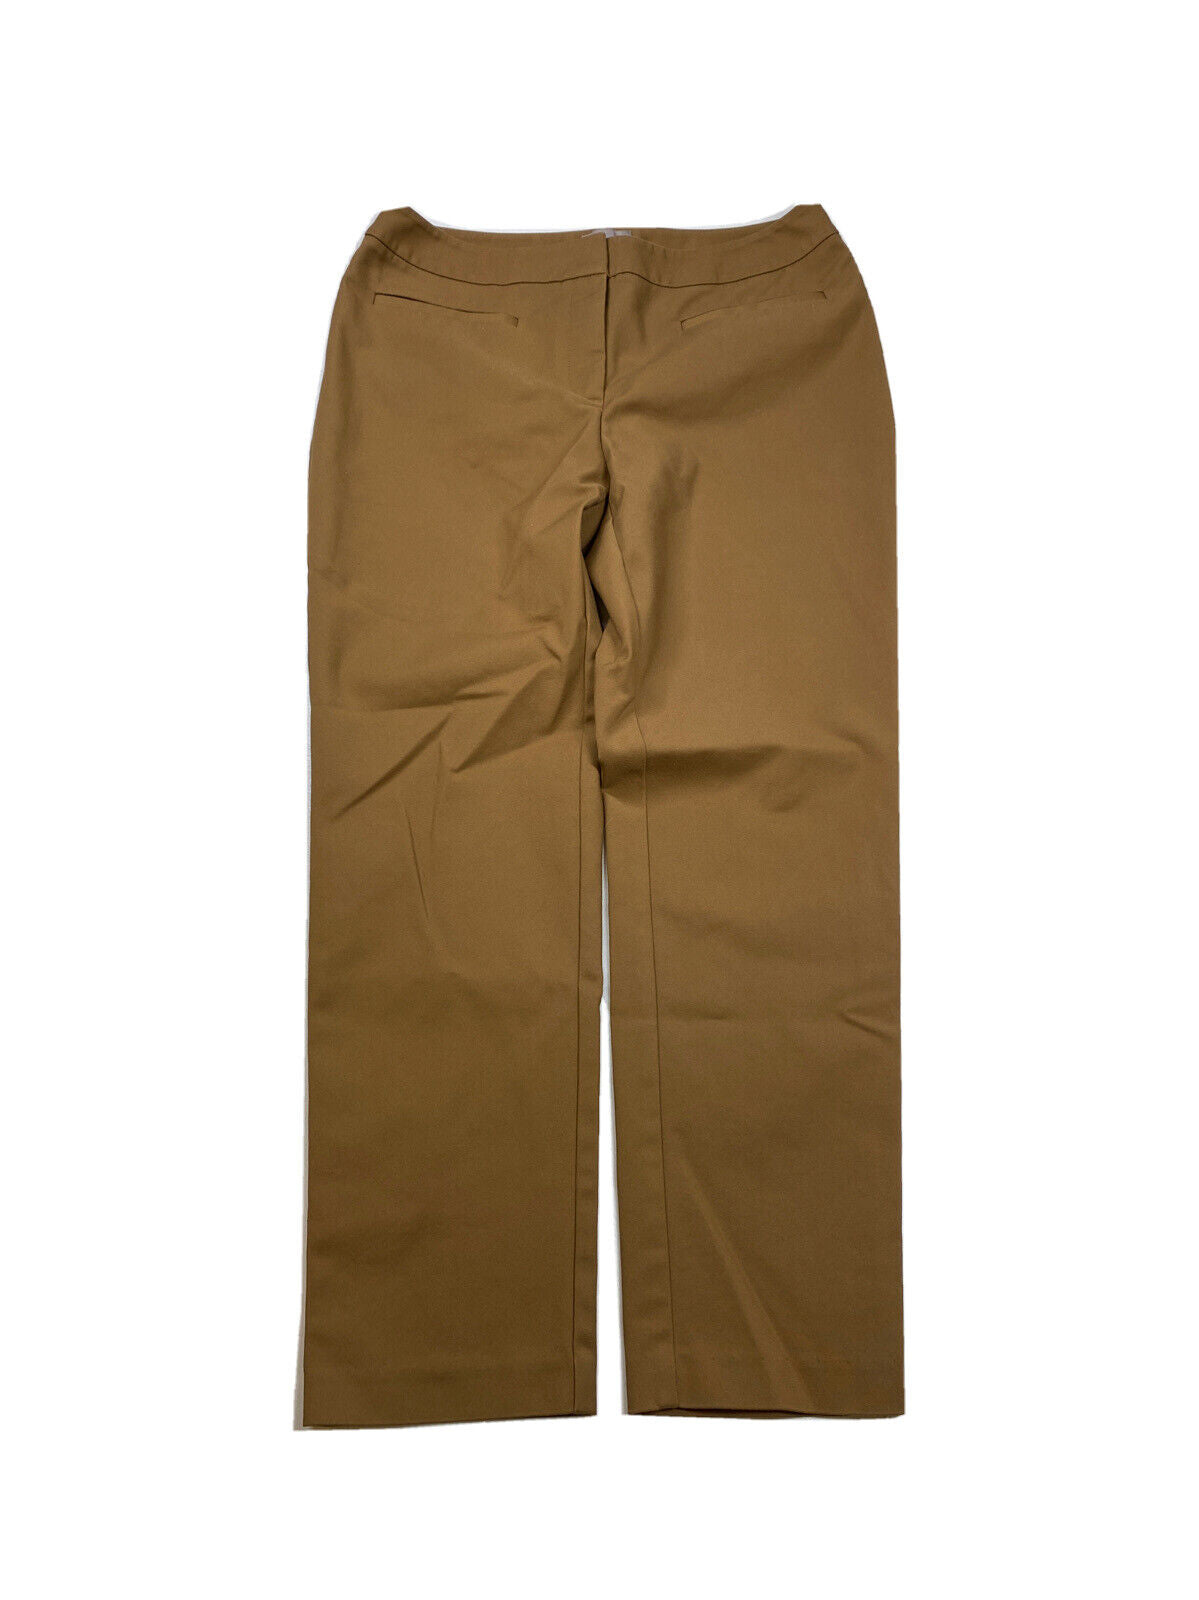 Chico's Women's Brown Stretch Slim Fit Ankle Chino Pants - 0.5/US 6